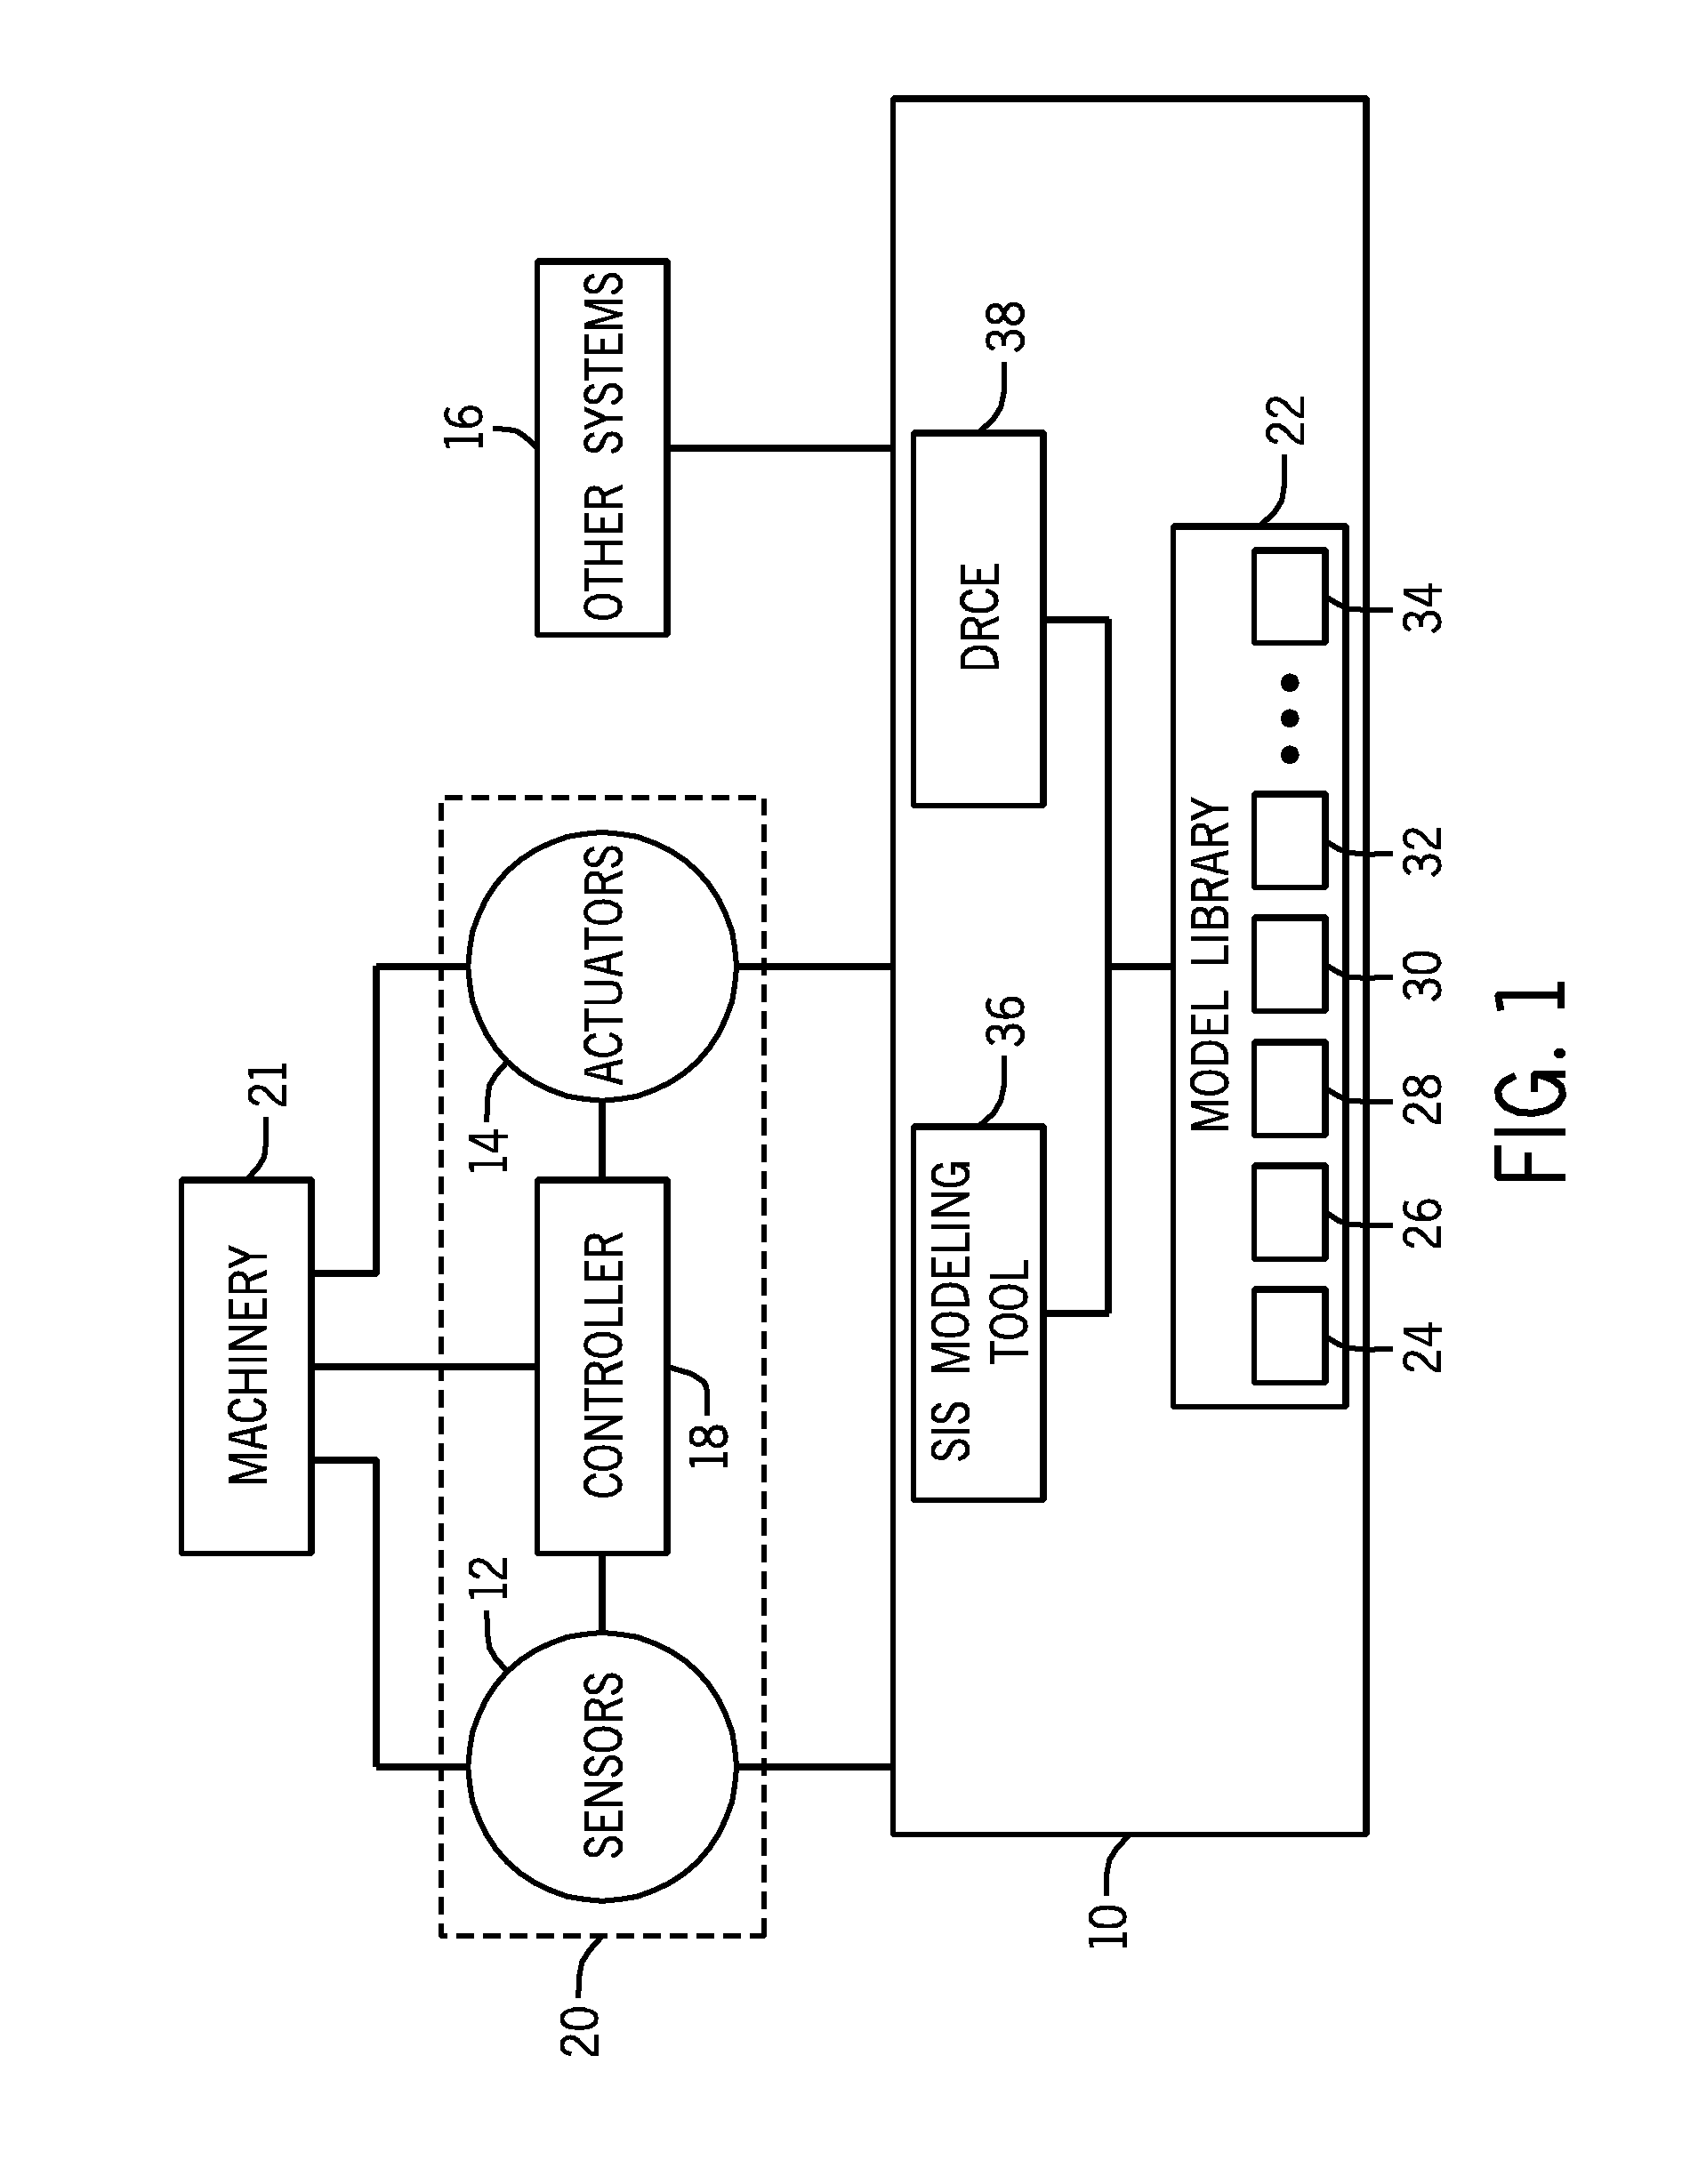 Systems and methods for improved reliability operations